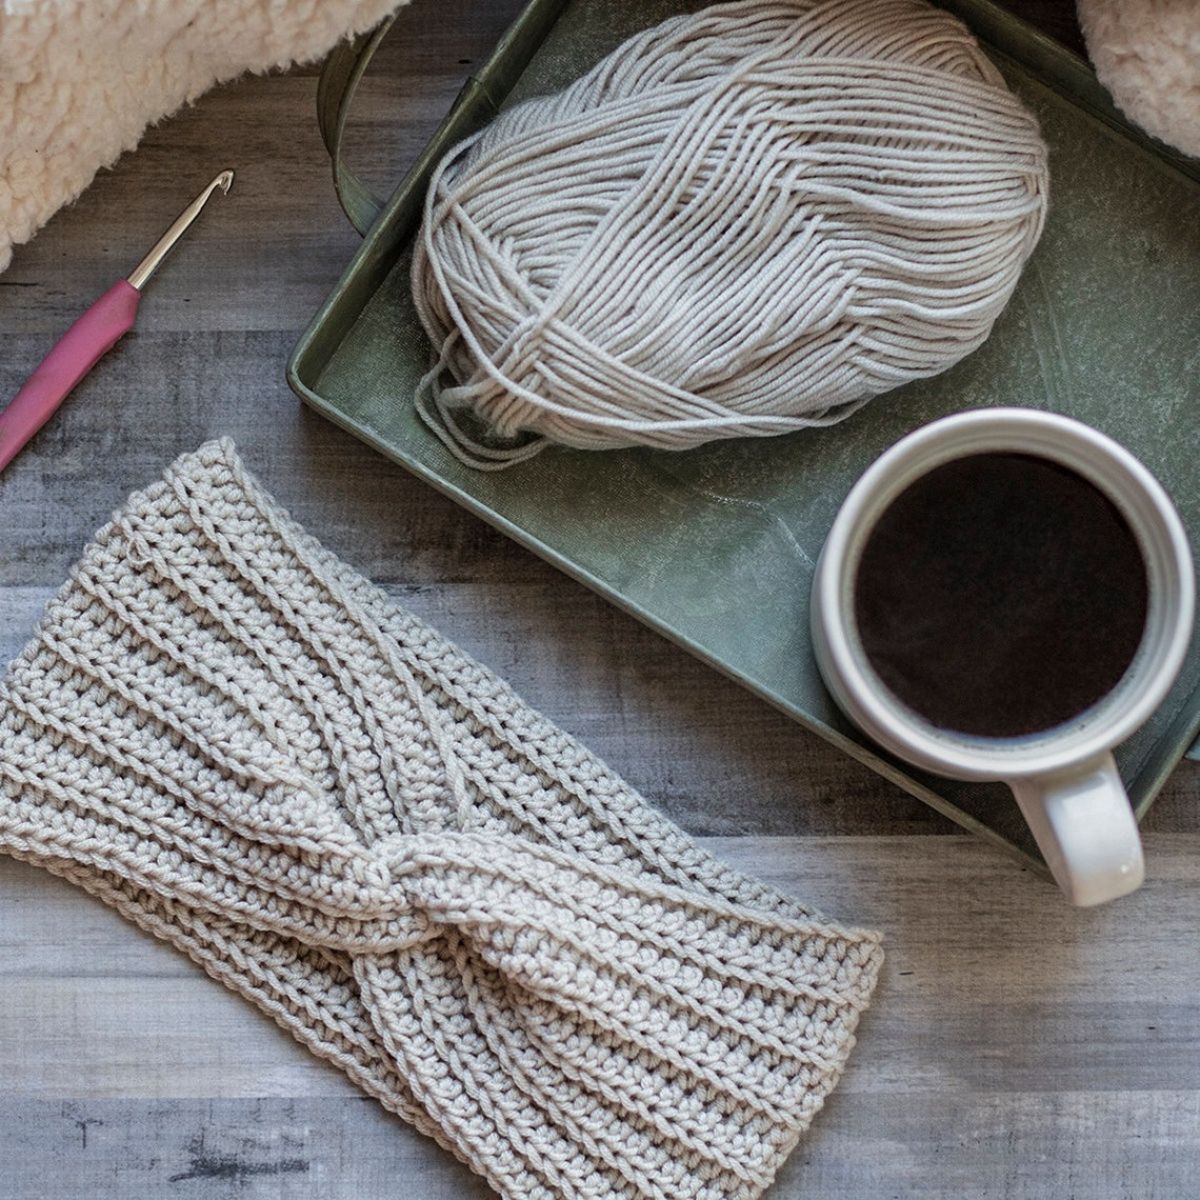 A cream crochet ear warmer with twisted design on the front on pale wooden flooring next to a cup of coffee, cream yarn, and crochet hook. 